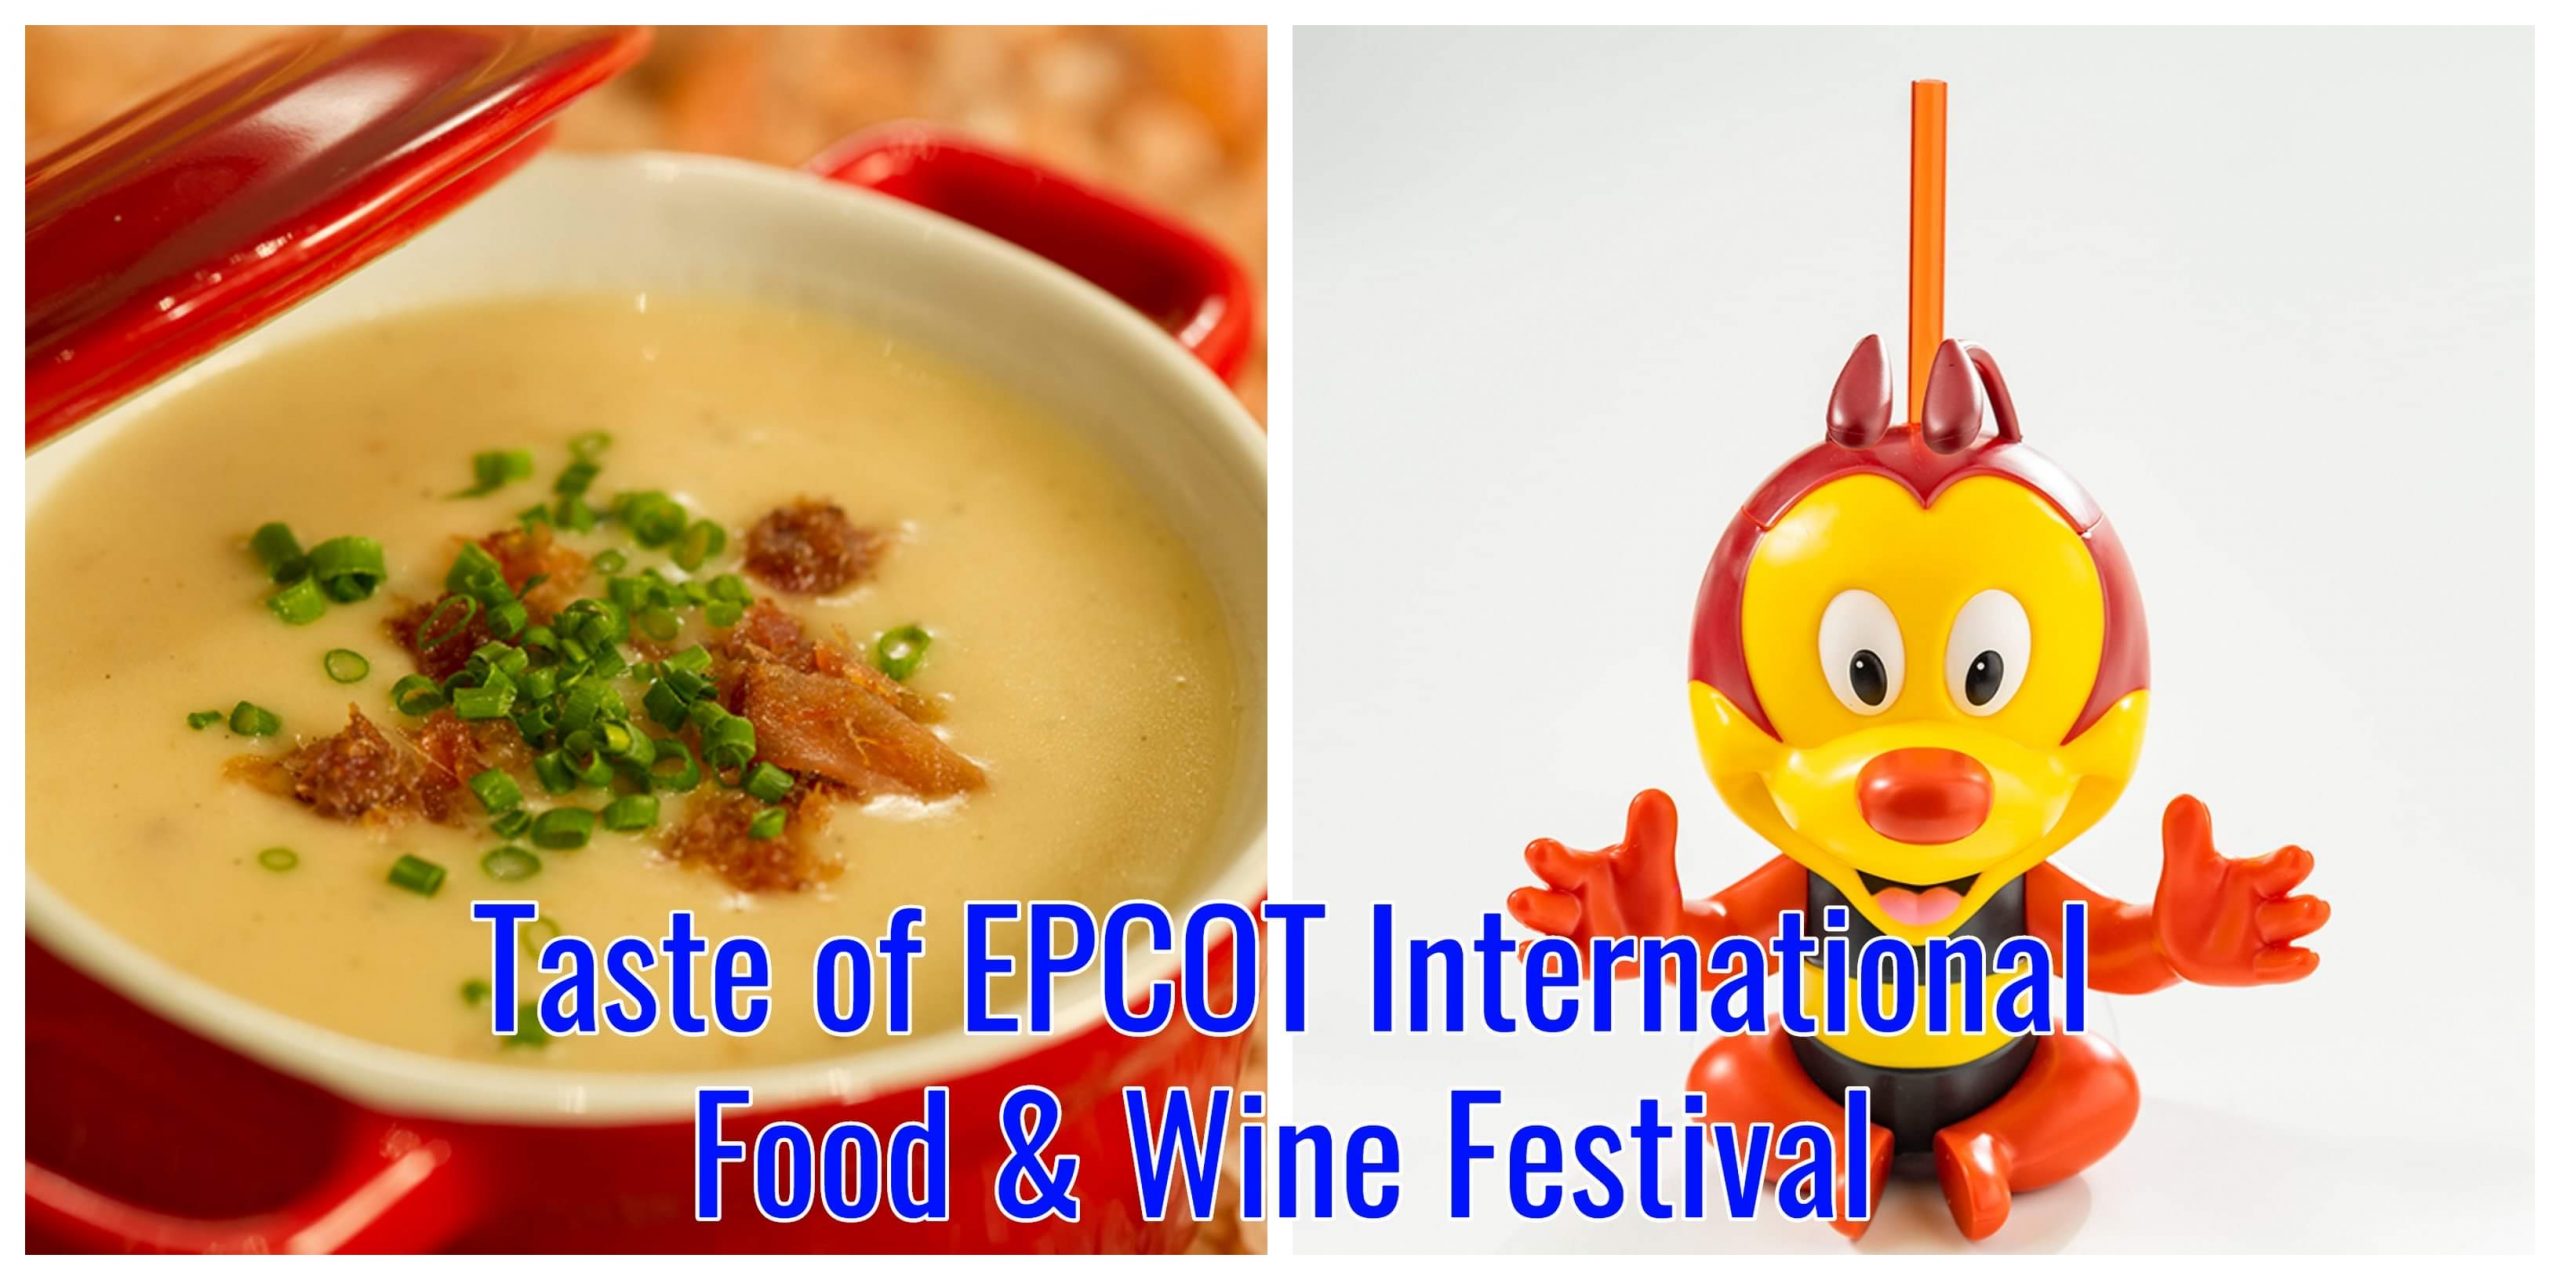 First Look at the Menu at Taste of EPCOT International Food & Wine Festival